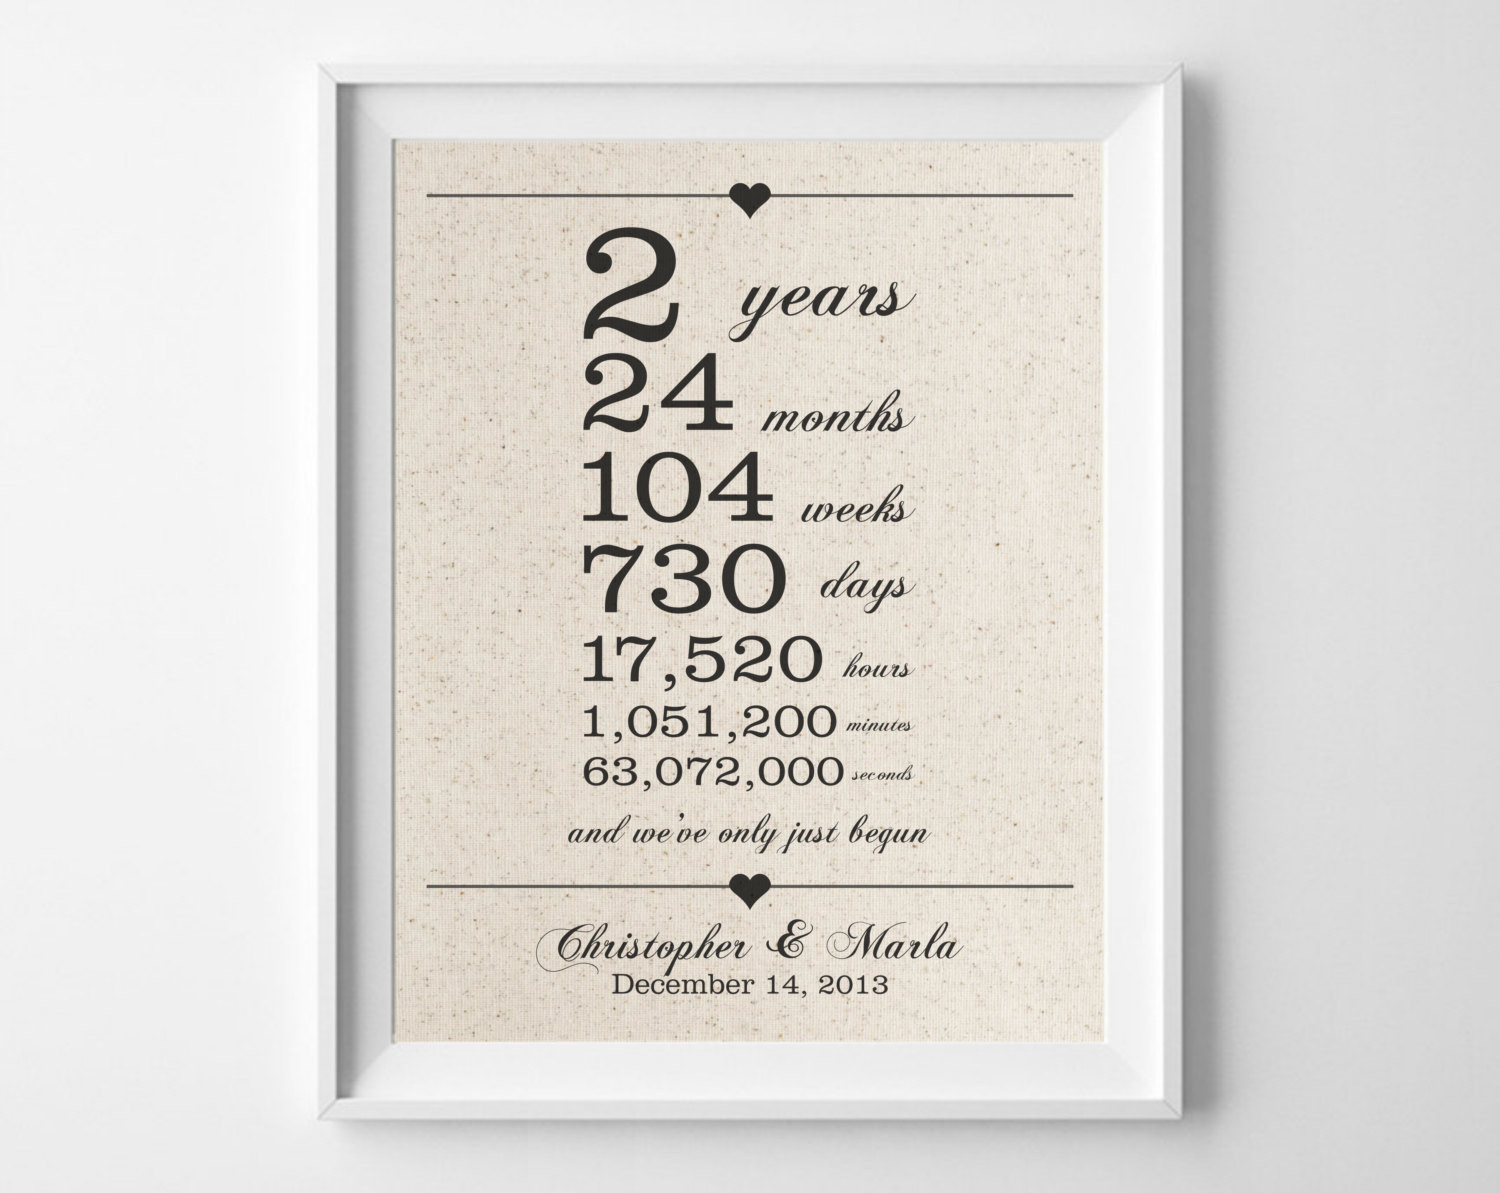 2Nd Anniversary Gift Ideas Cotton
 2 years to her Cotton Anniversary Print 2nd Anniversary